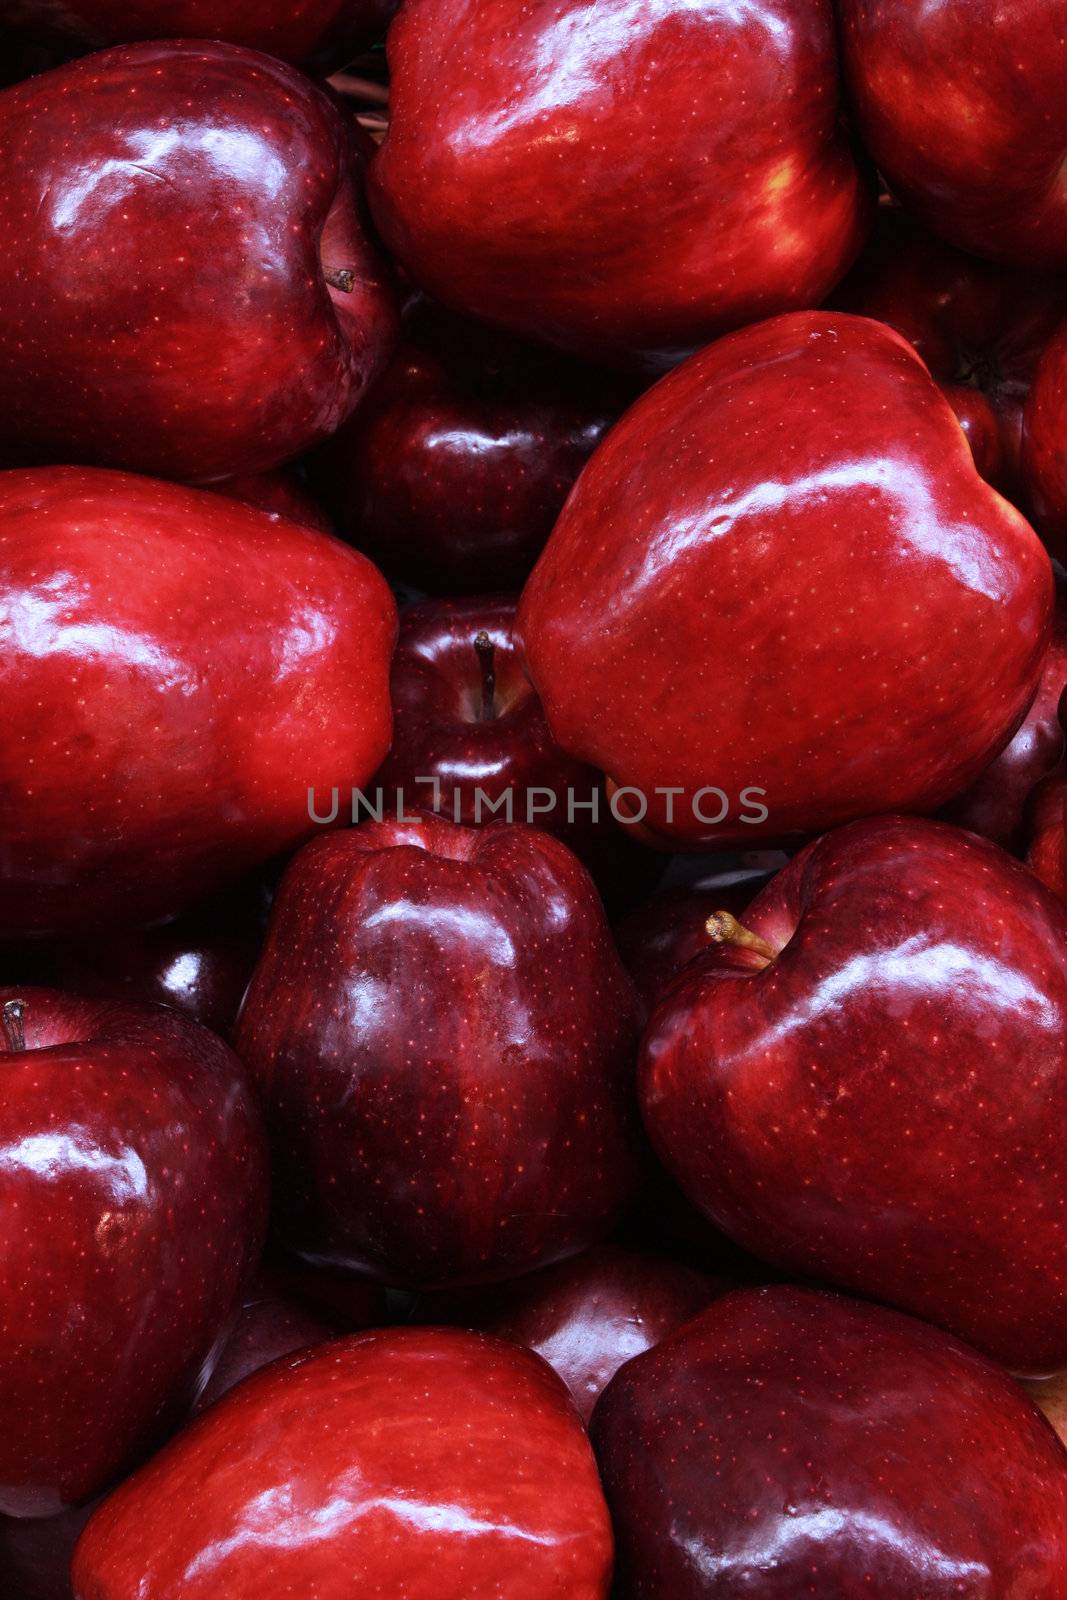 A pile of red apples at a farmers market